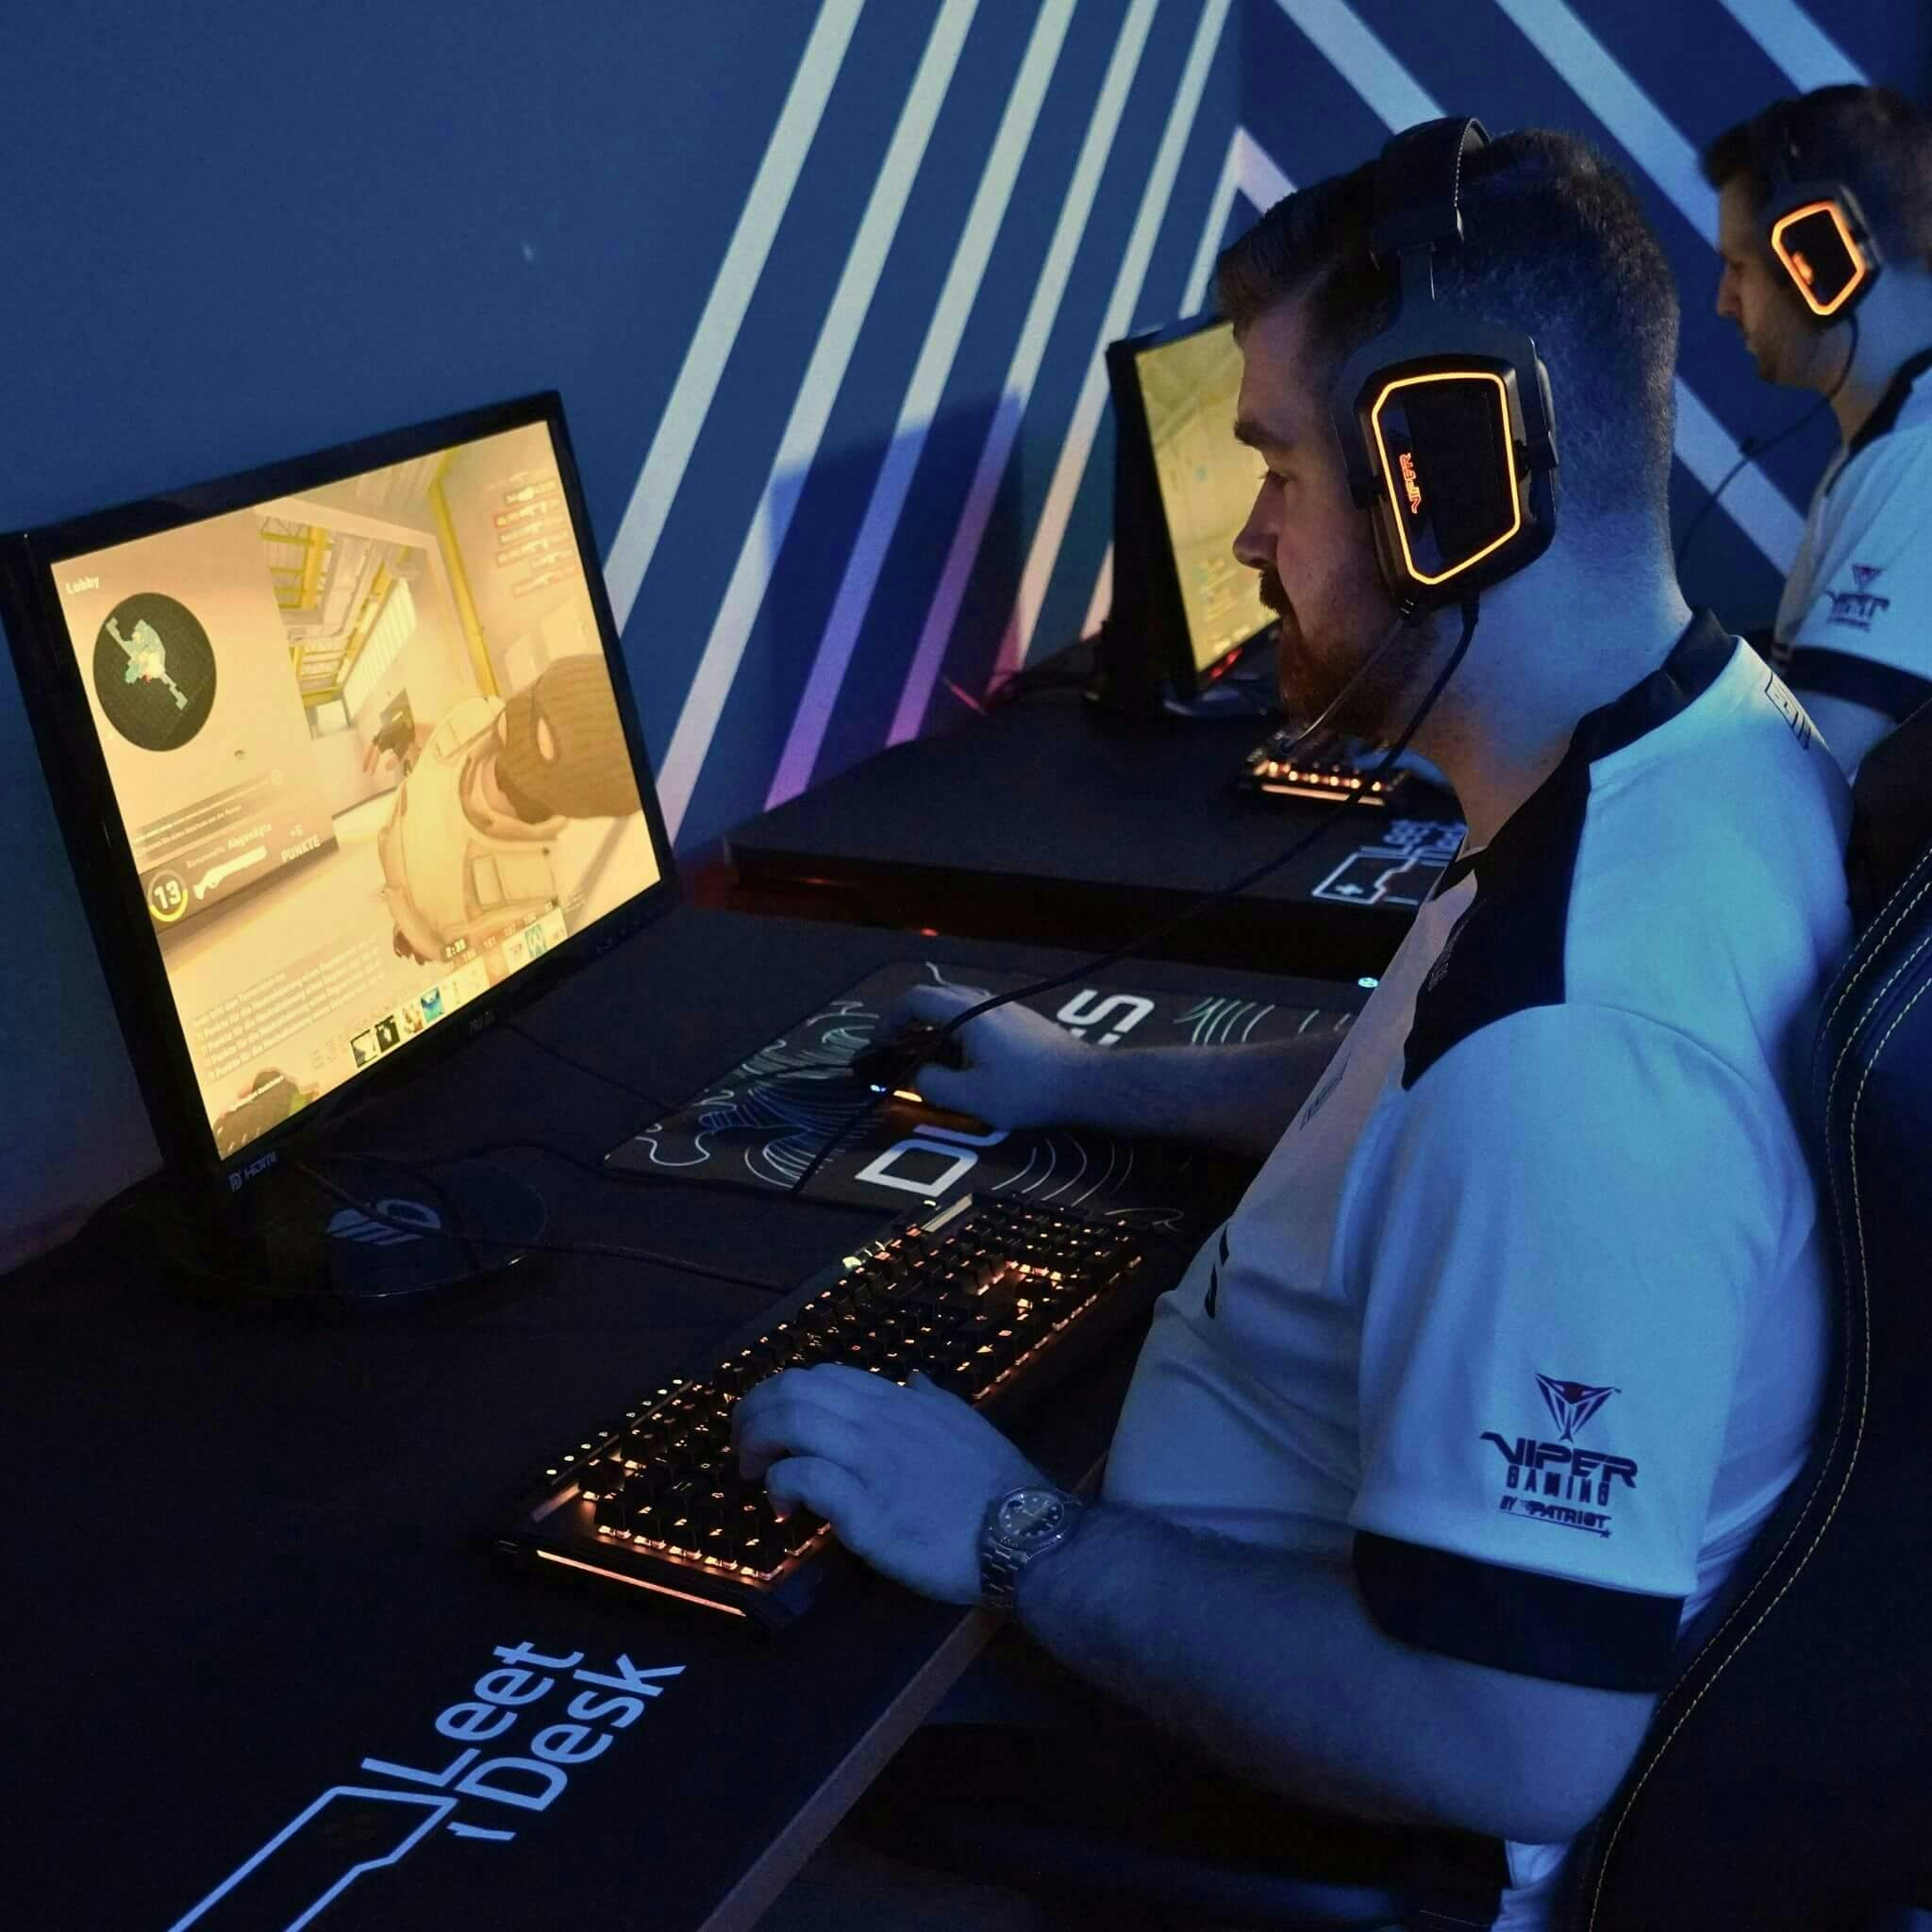 LeetDesk gaming mousepads are used by esports athletes.